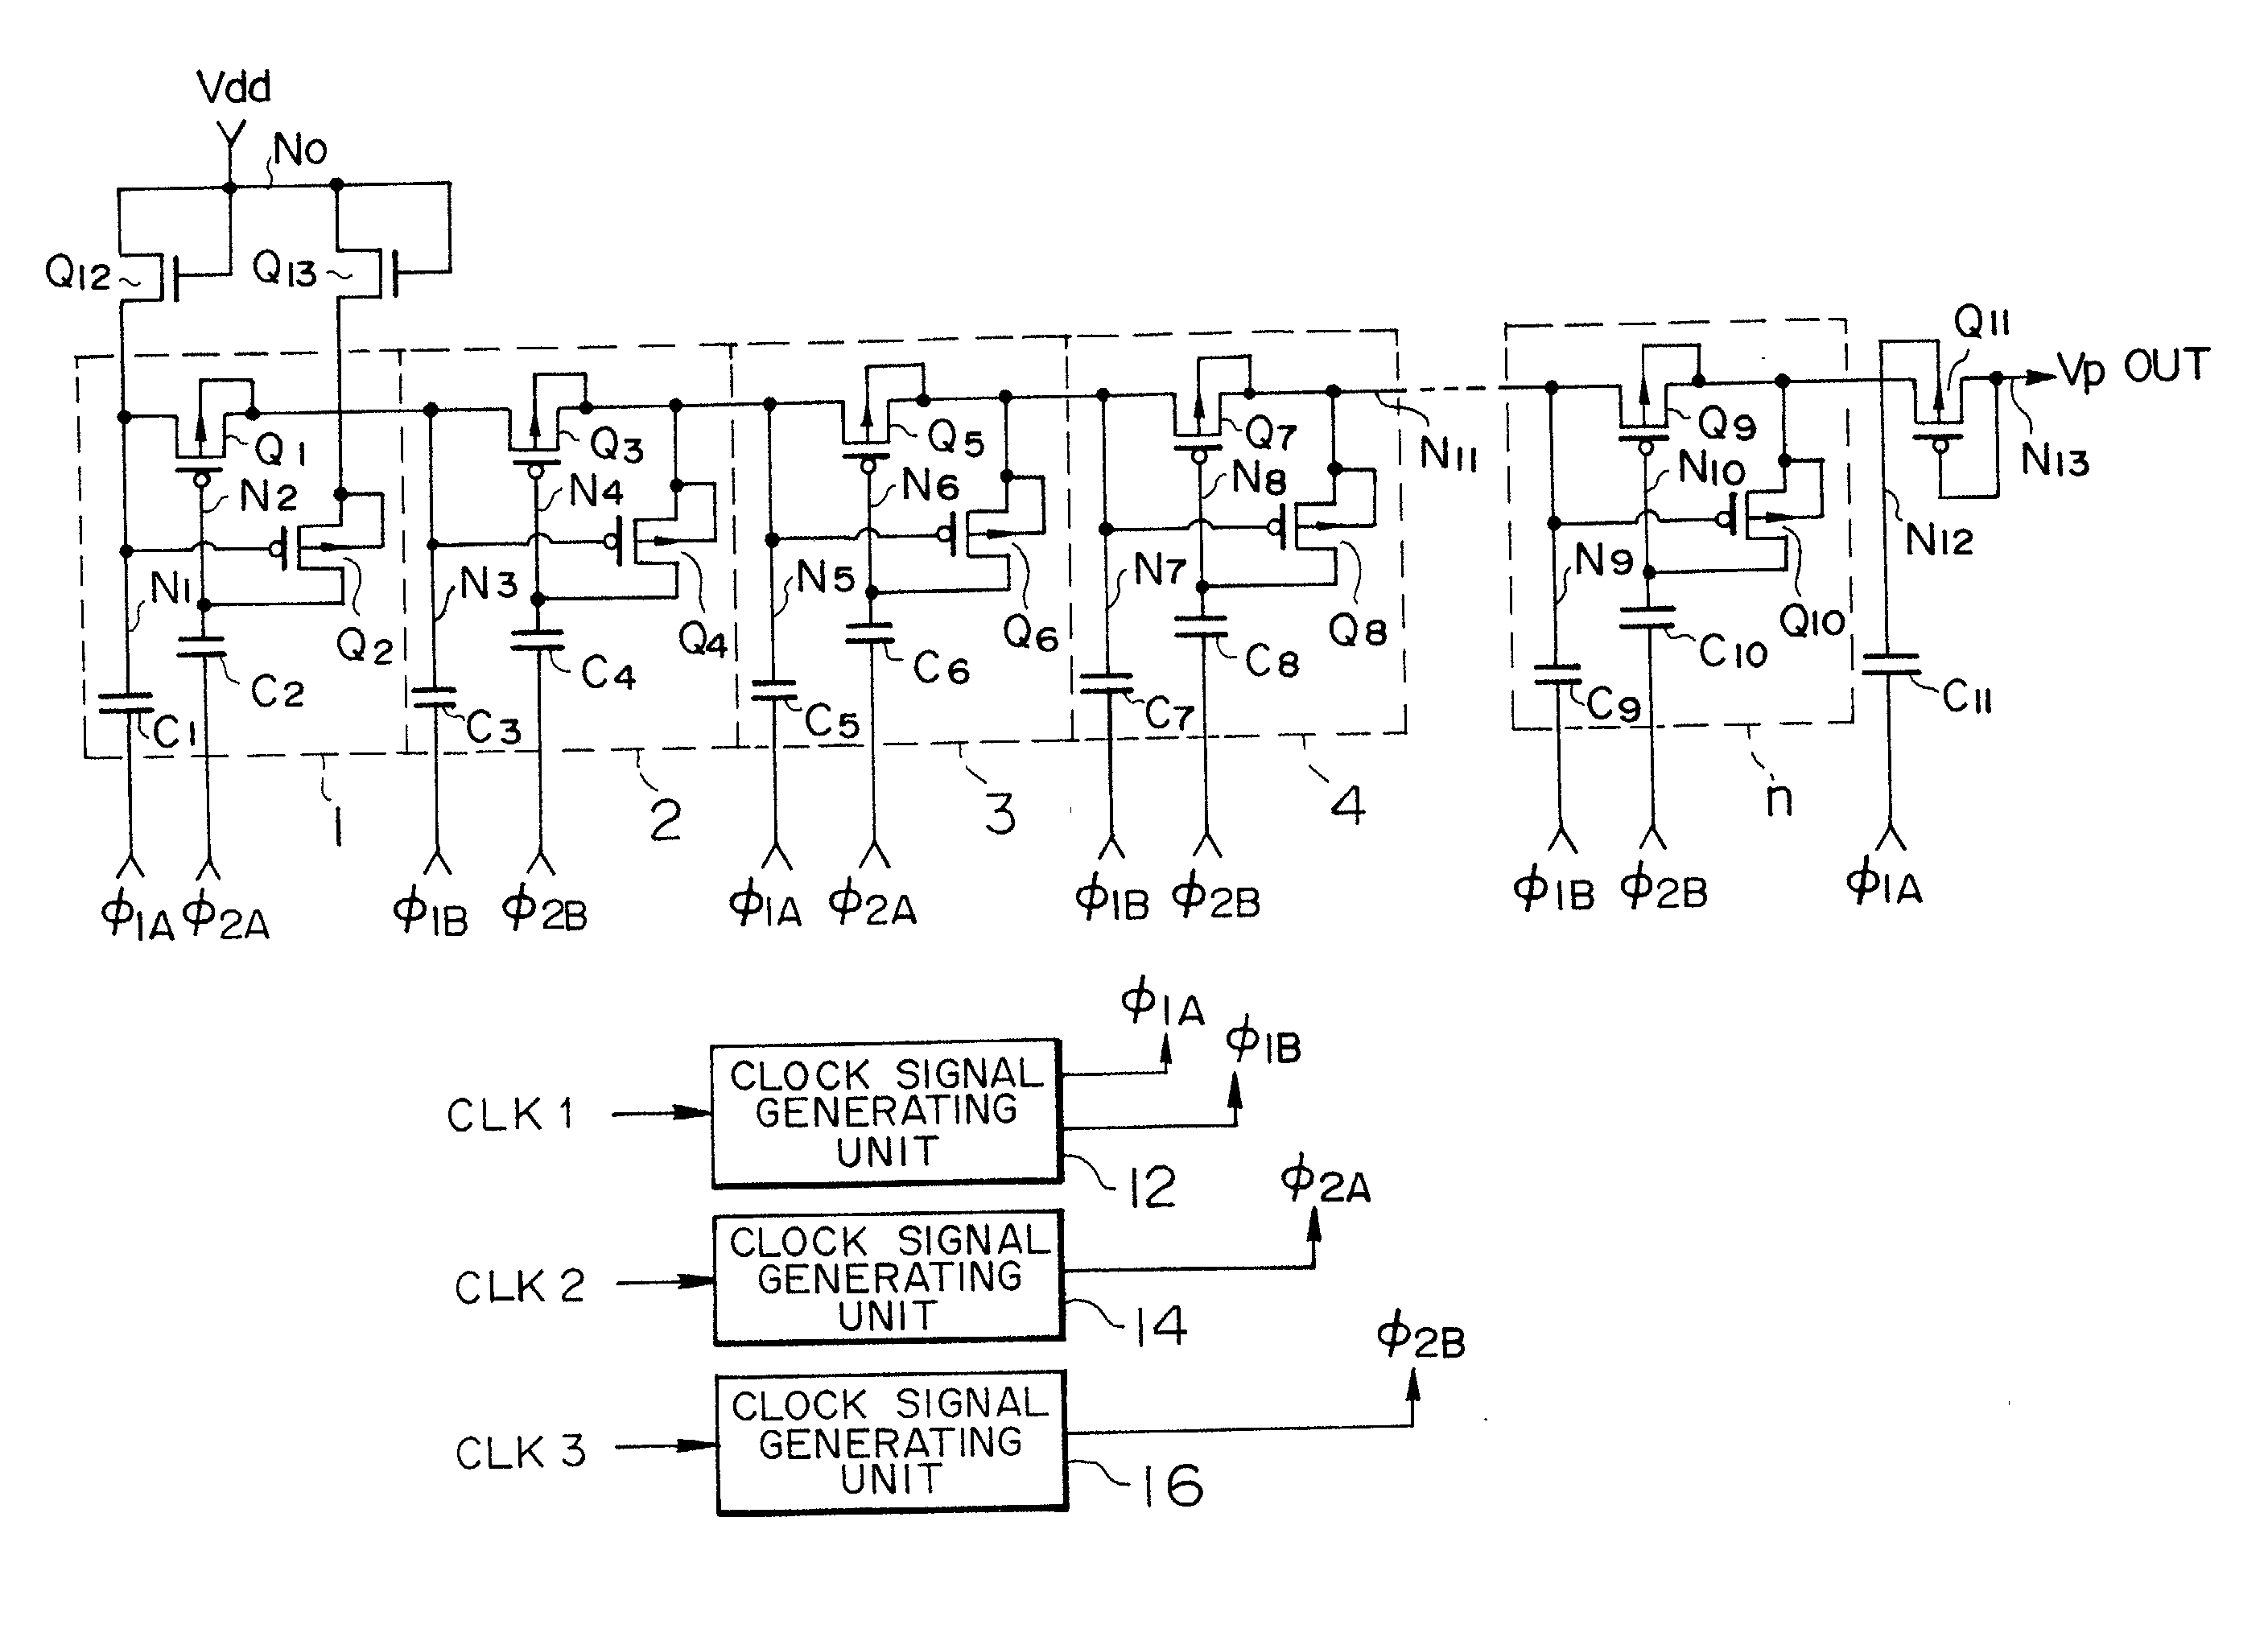 Semiconductor booster circuit having cascaded MOS transistors